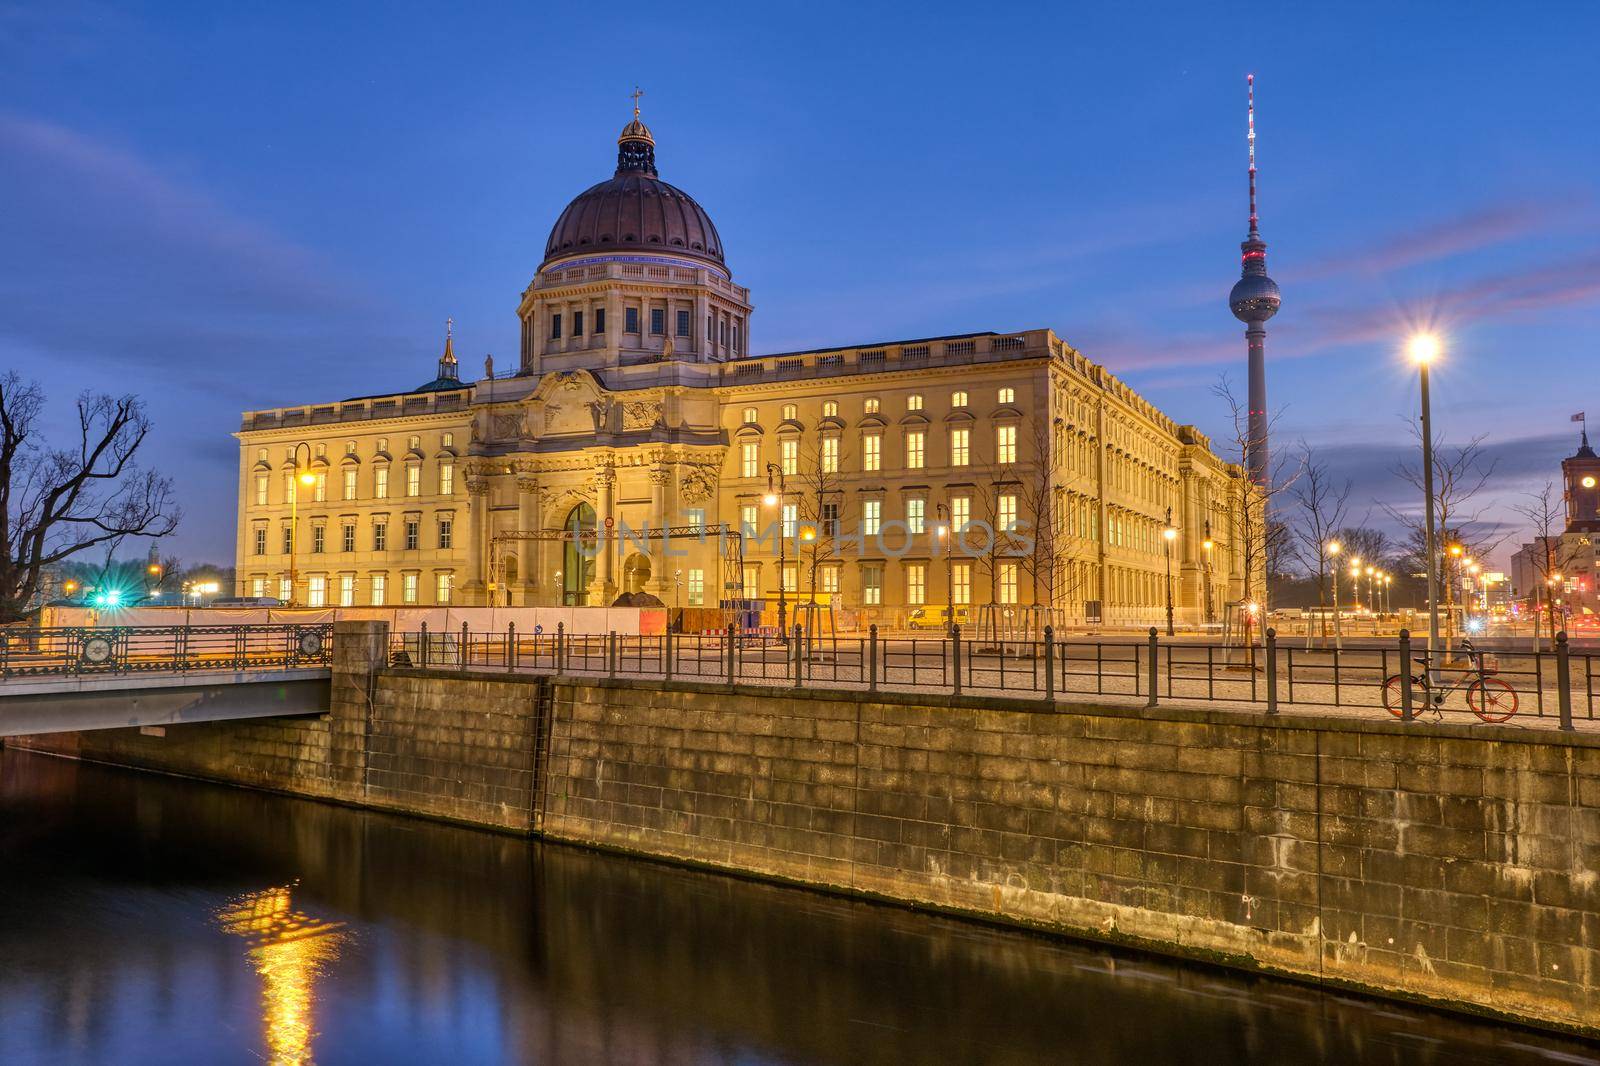 The imposing rebuilt Berlin City Palace with the Television Tower at dawn